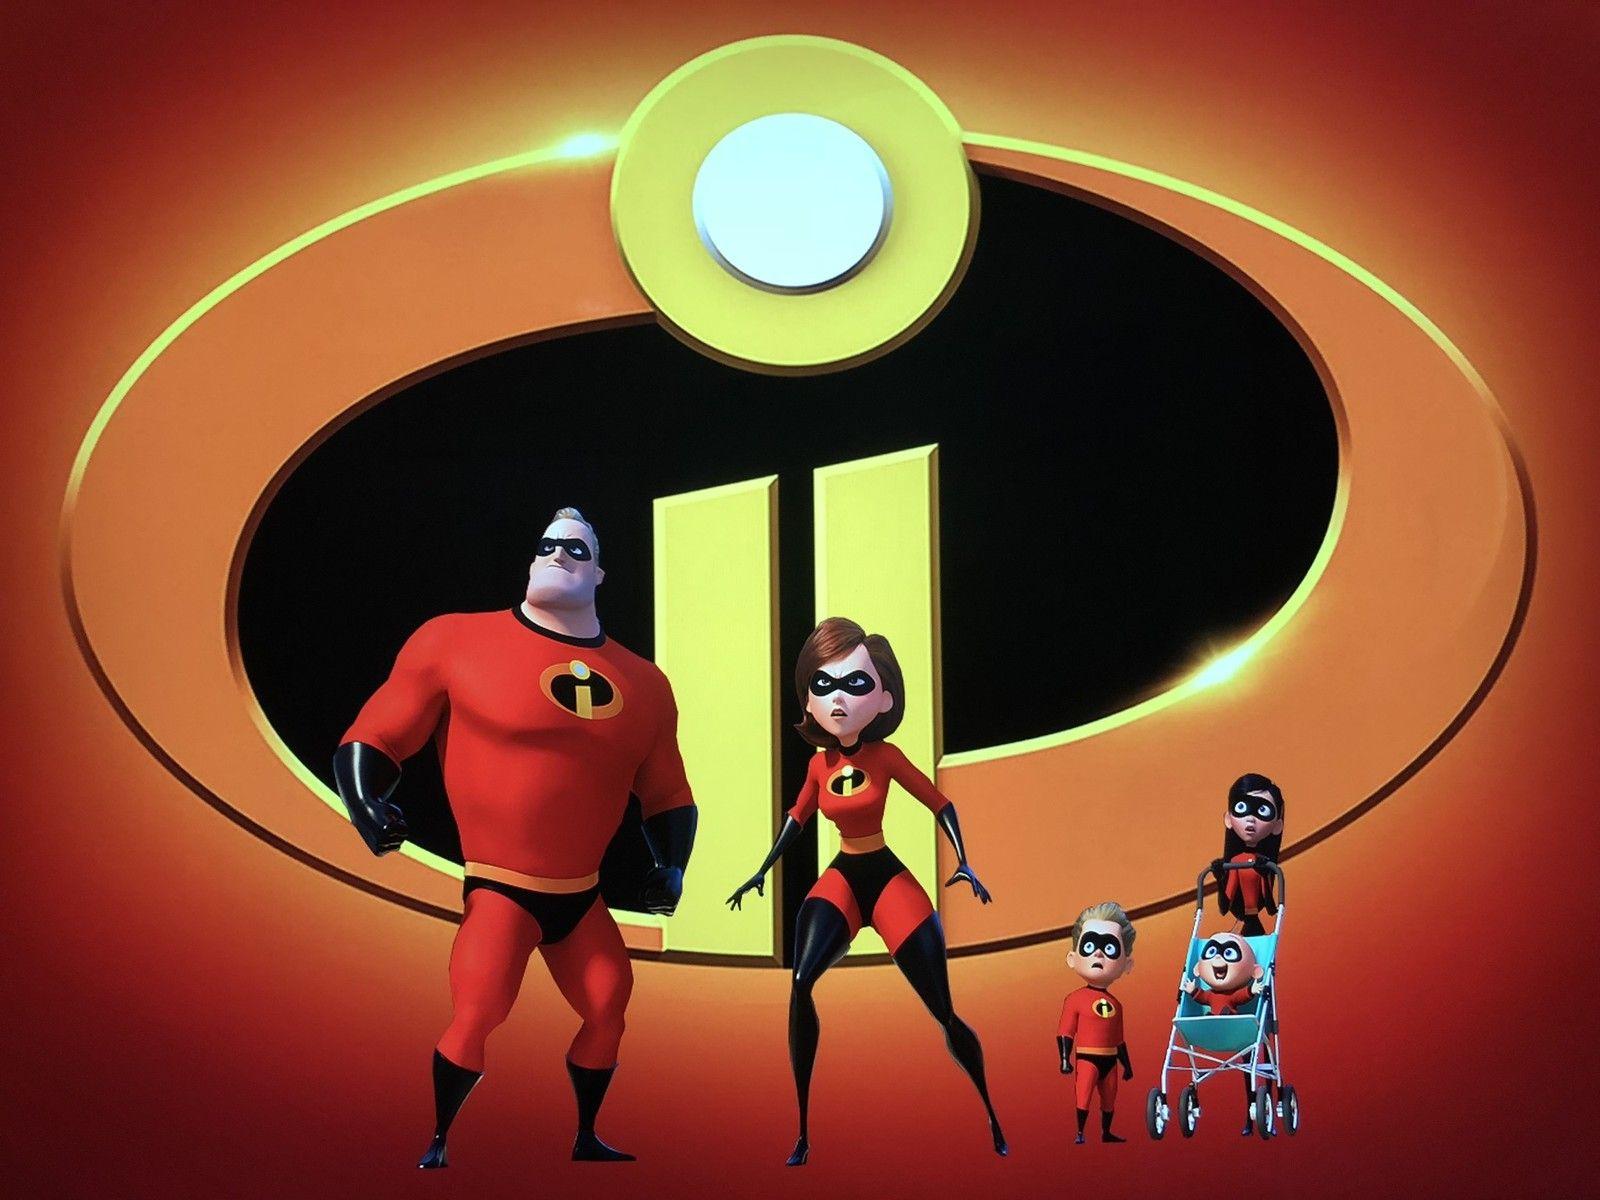 Celebrate the launch of Incredibles 2 with some fantastic Disney fun